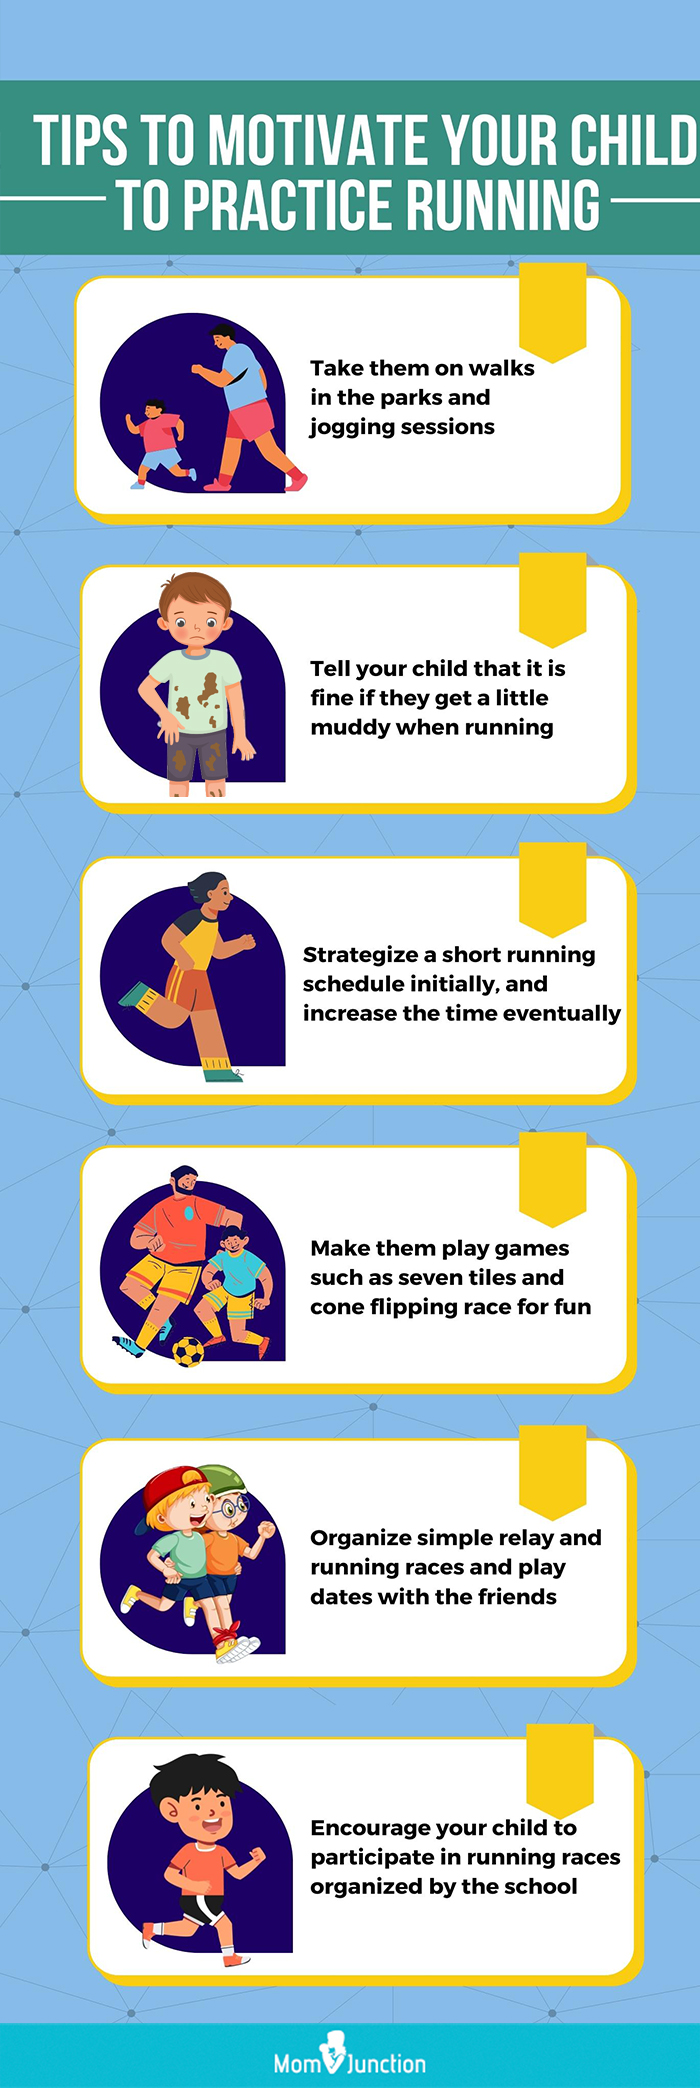 tips to motivate children (infographic)